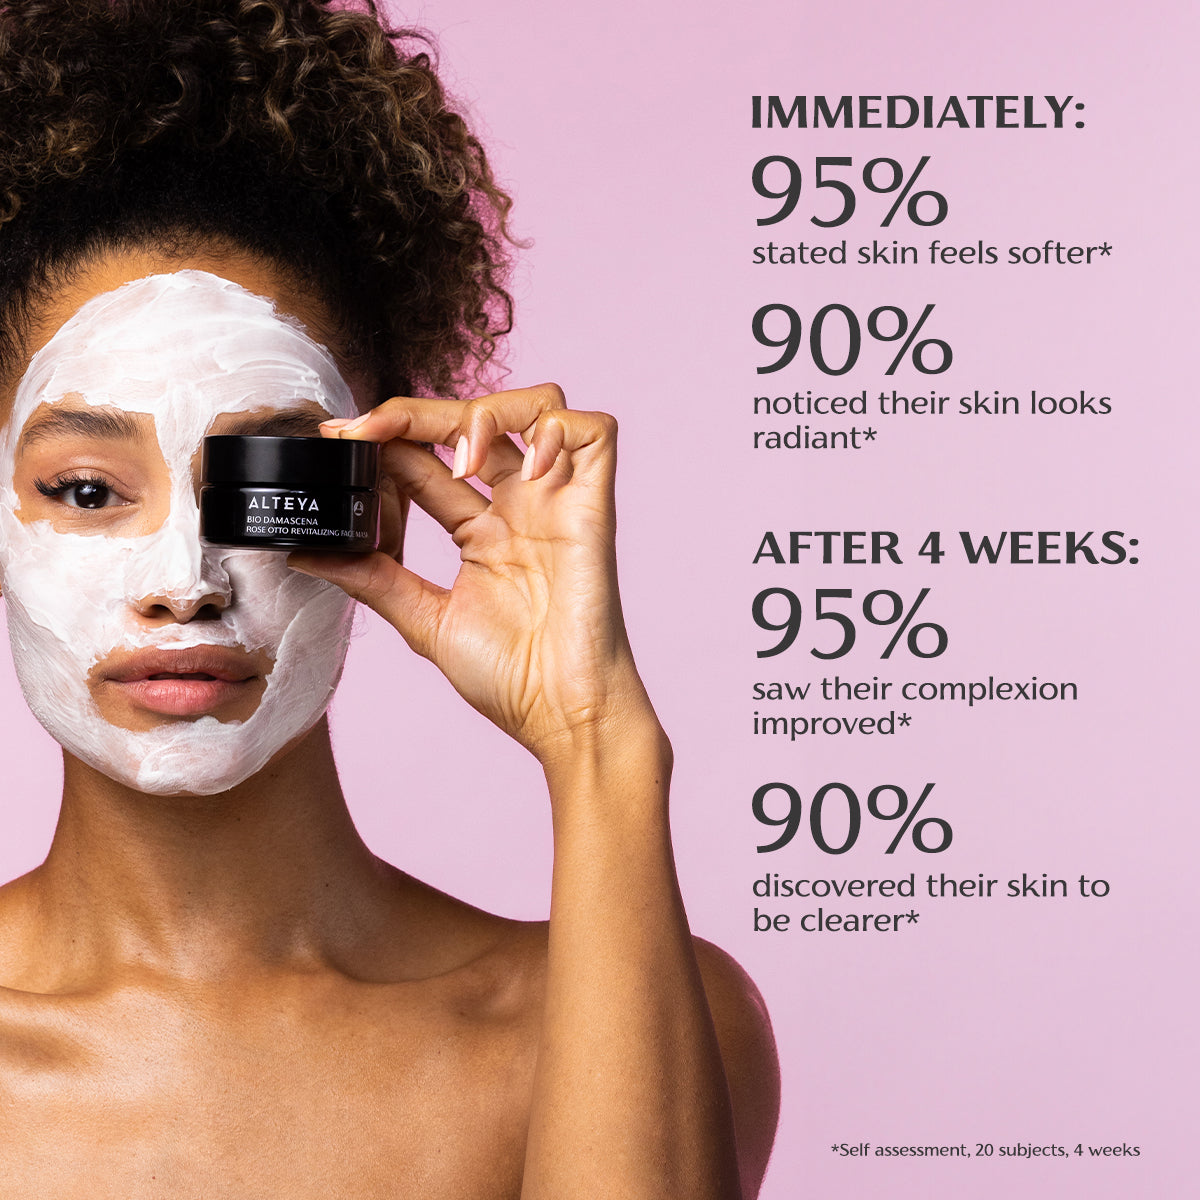 Woman applying Bio Damascena Rose Otto Revitalizing Face Mask, holding a skincare product, with skin benefits percentages listed including antioxidants.